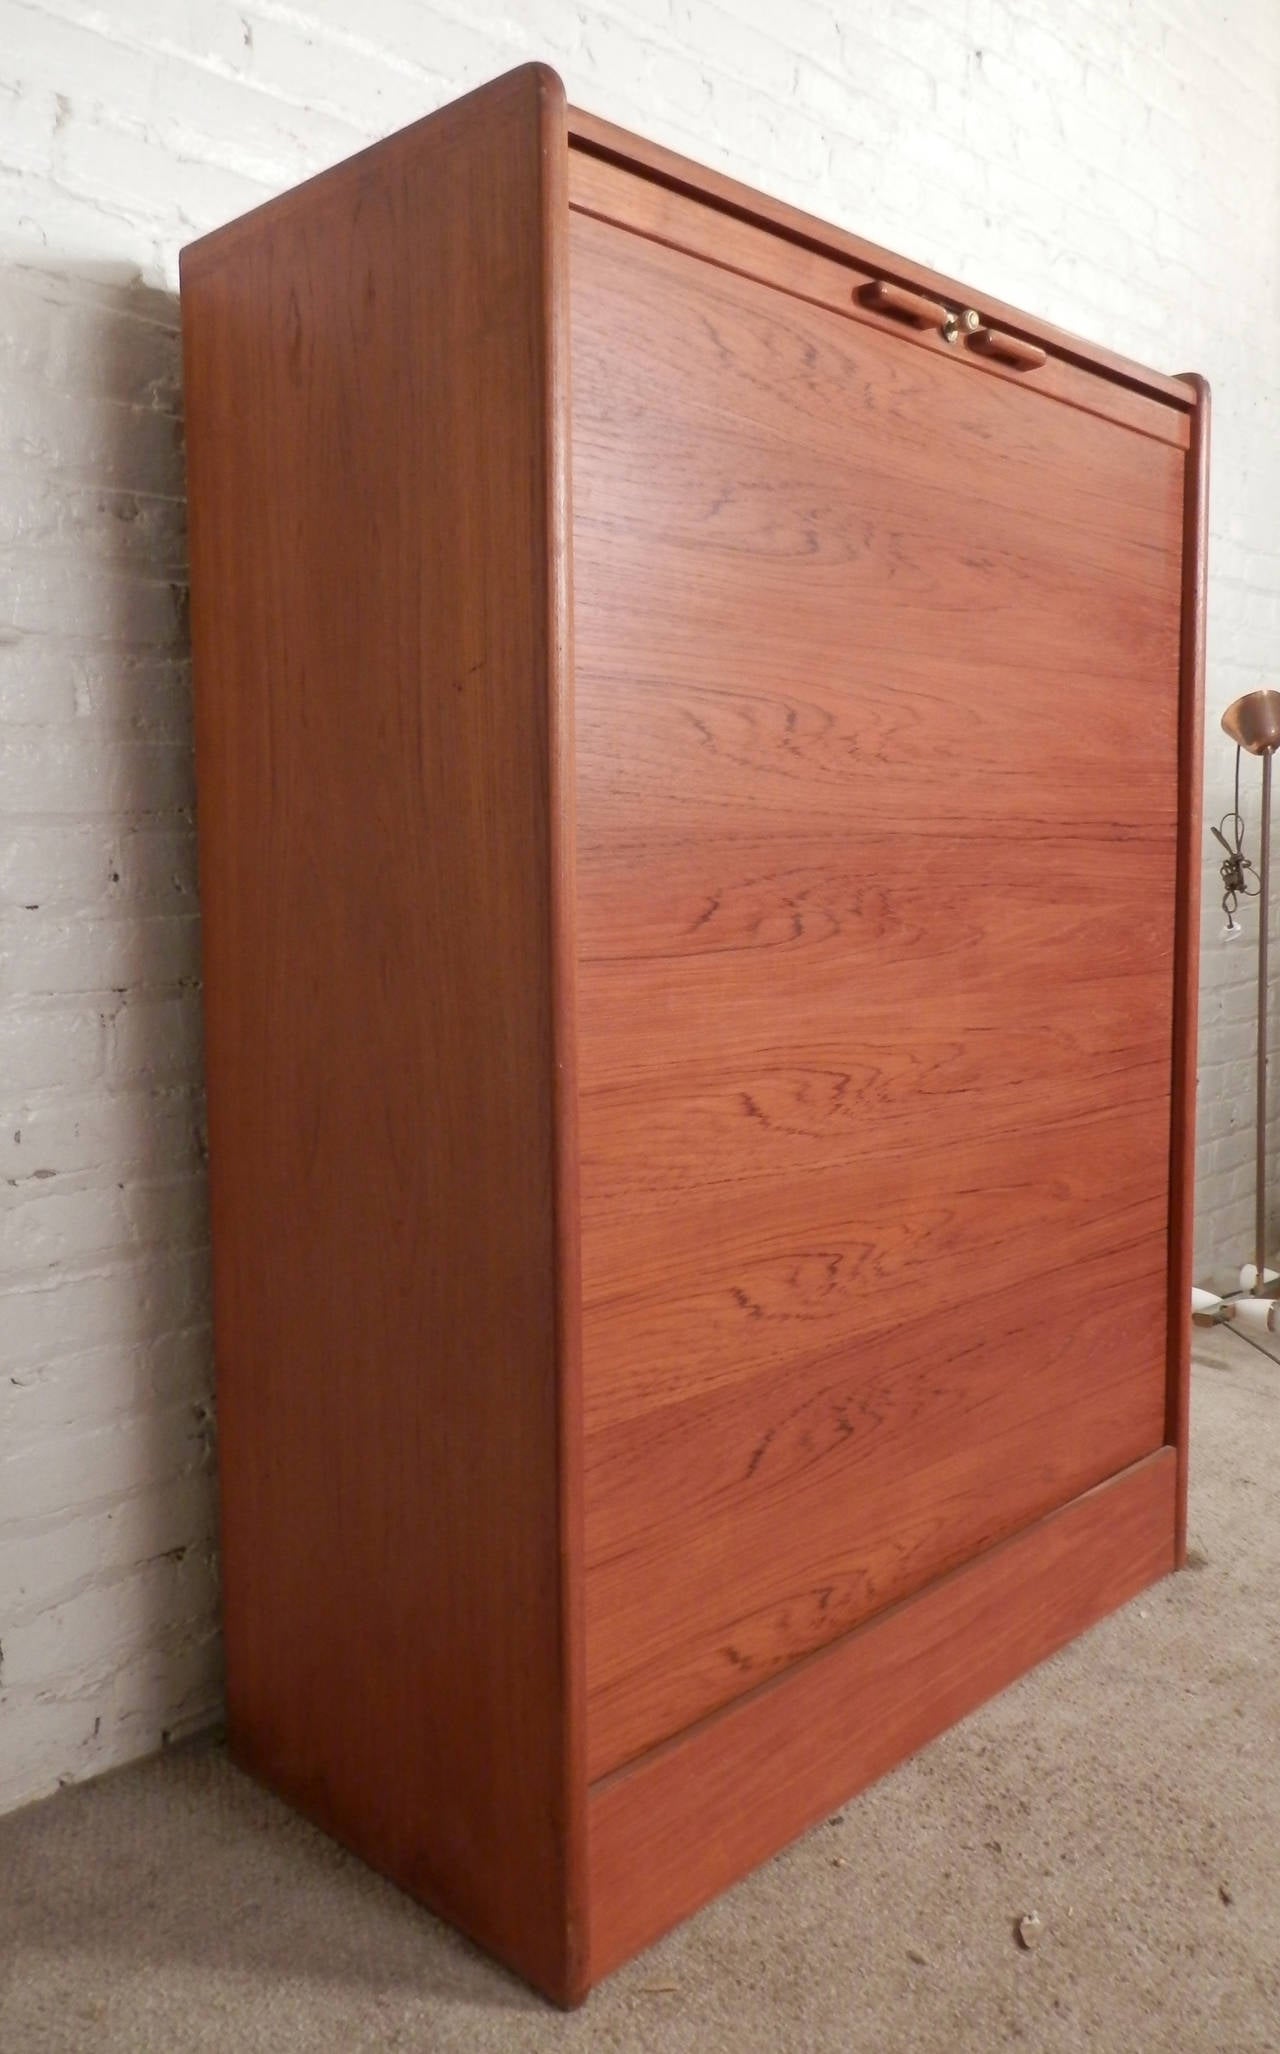 Mid-Century Modern dresser with vertical sliding door revealing three large drawers. Warm teak grain throughout, brass knob locks the tambour door in place. Works as a dresser or media closet.

(Please confirm item location - NY or NJ - with